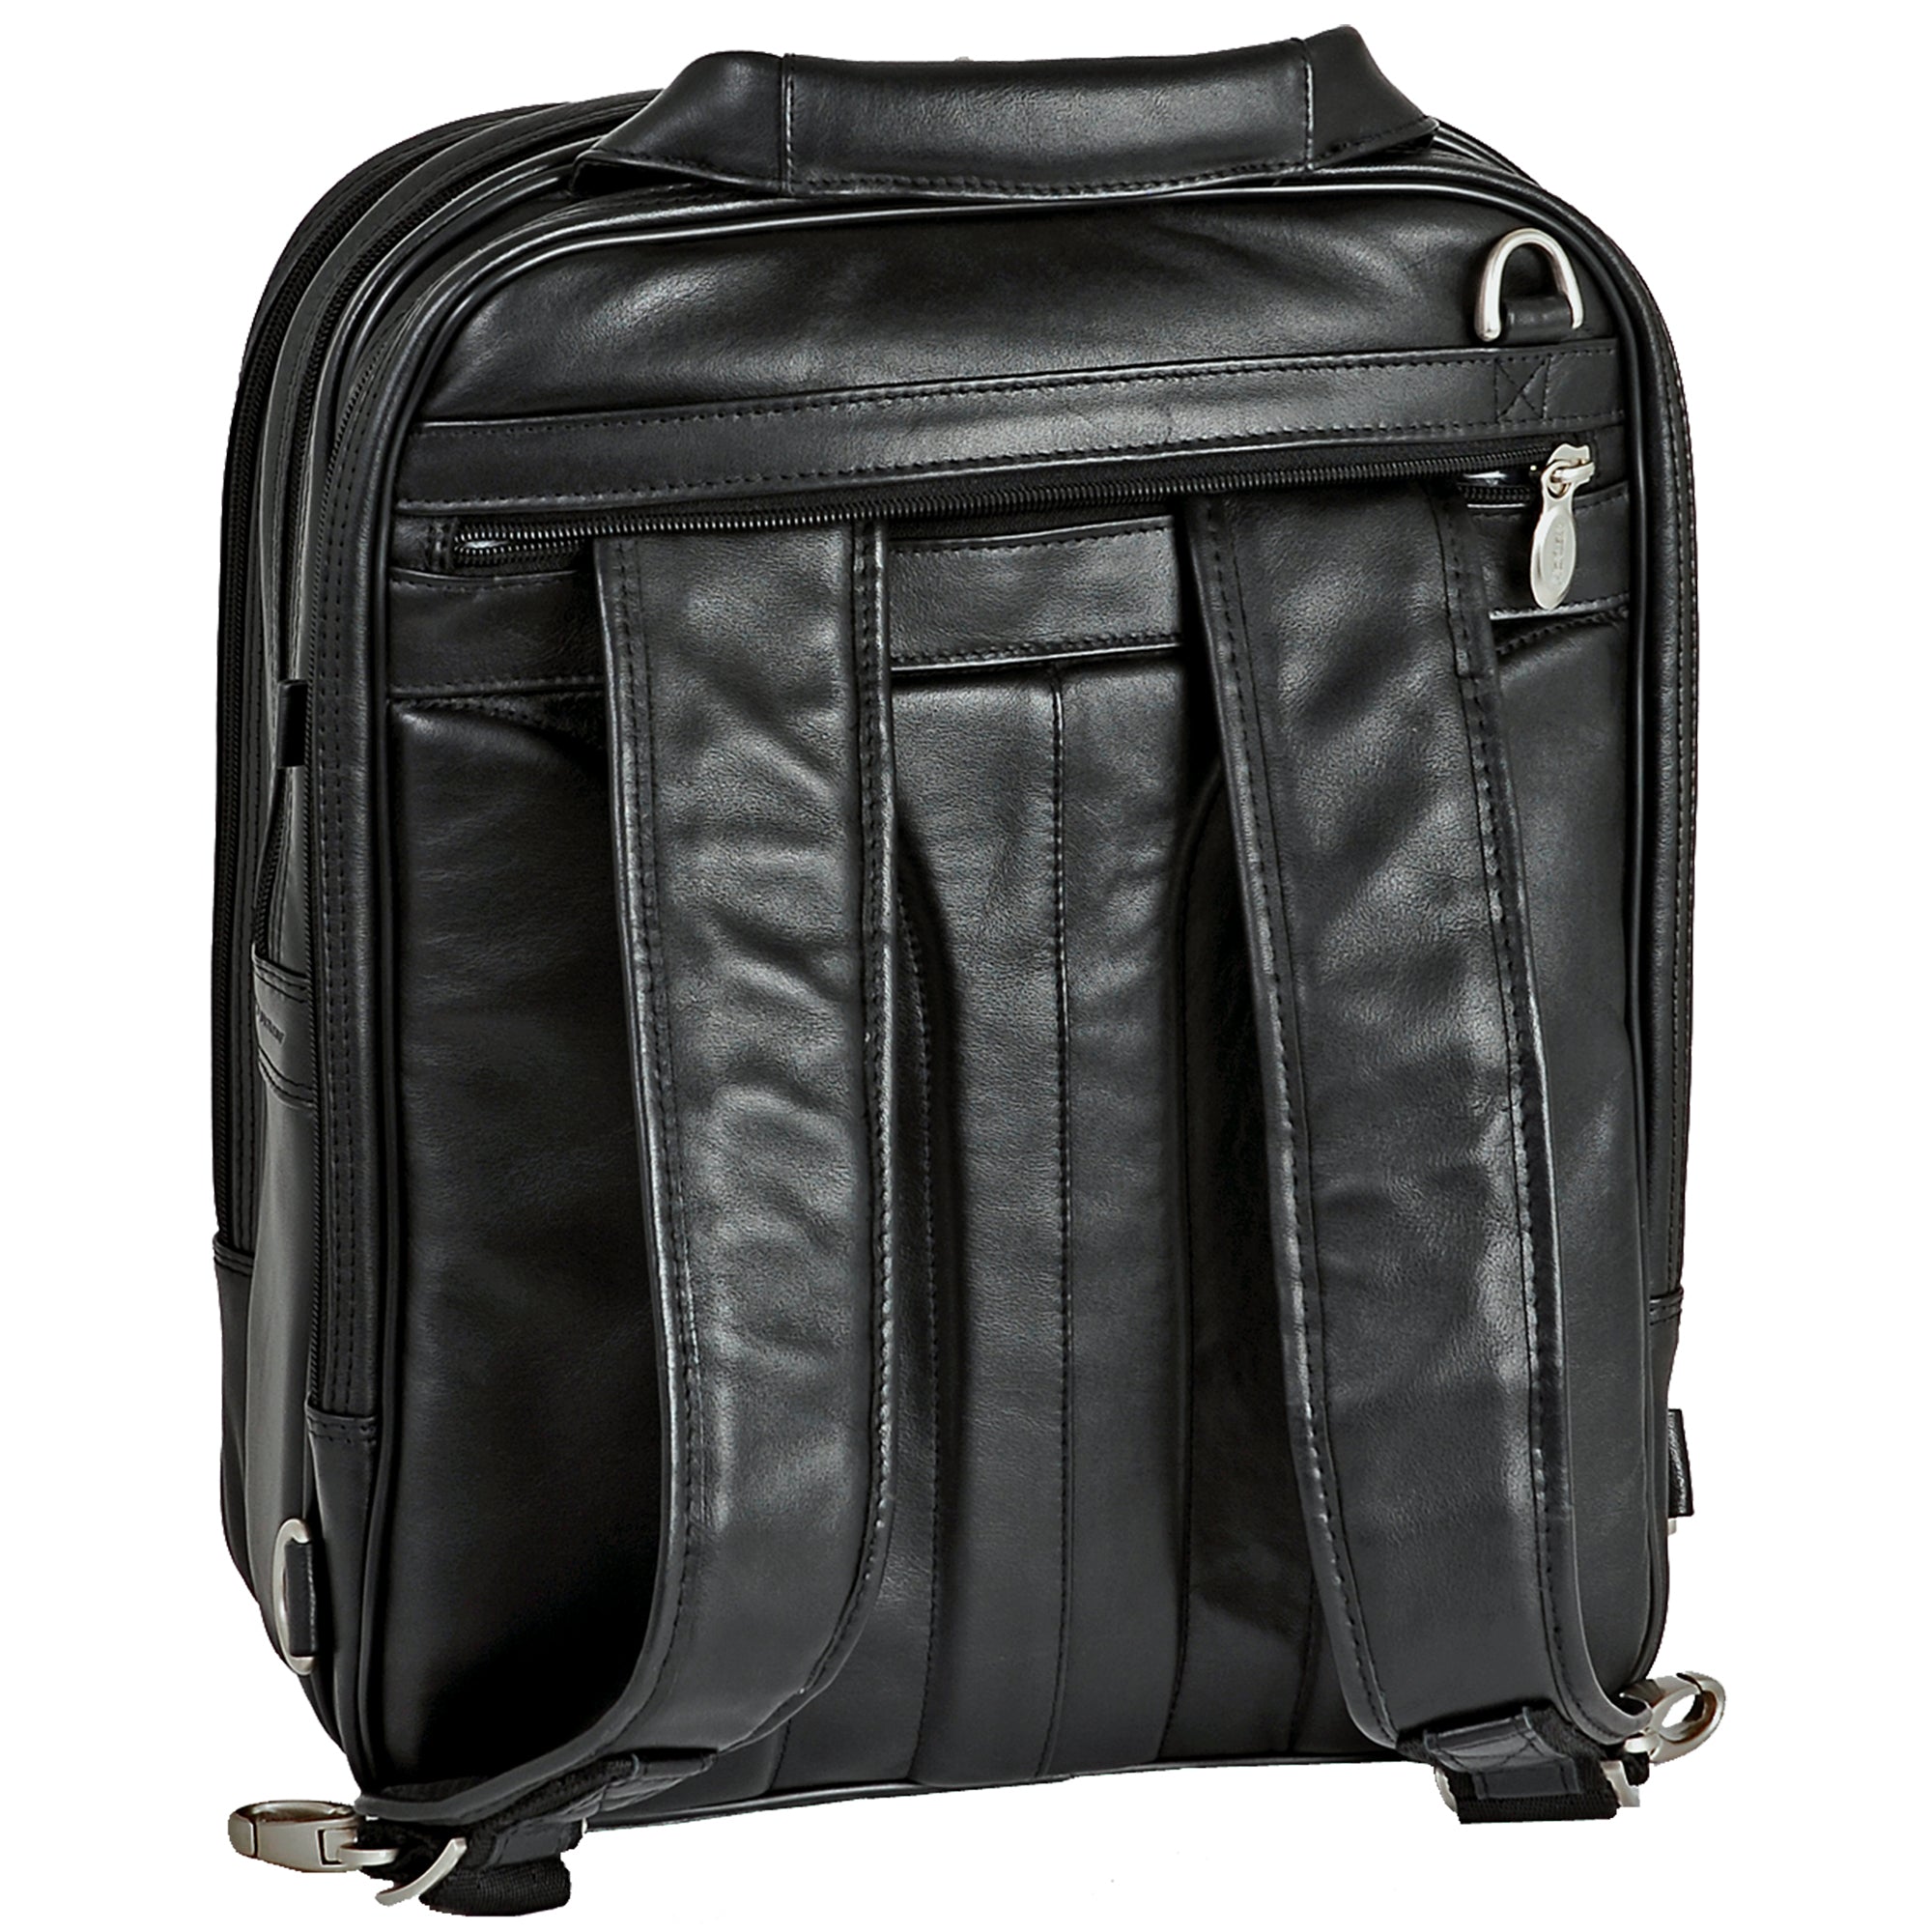 McKlein LINCOLN PARK 15" Leather Three-Way Backpack Laptop Briefcase